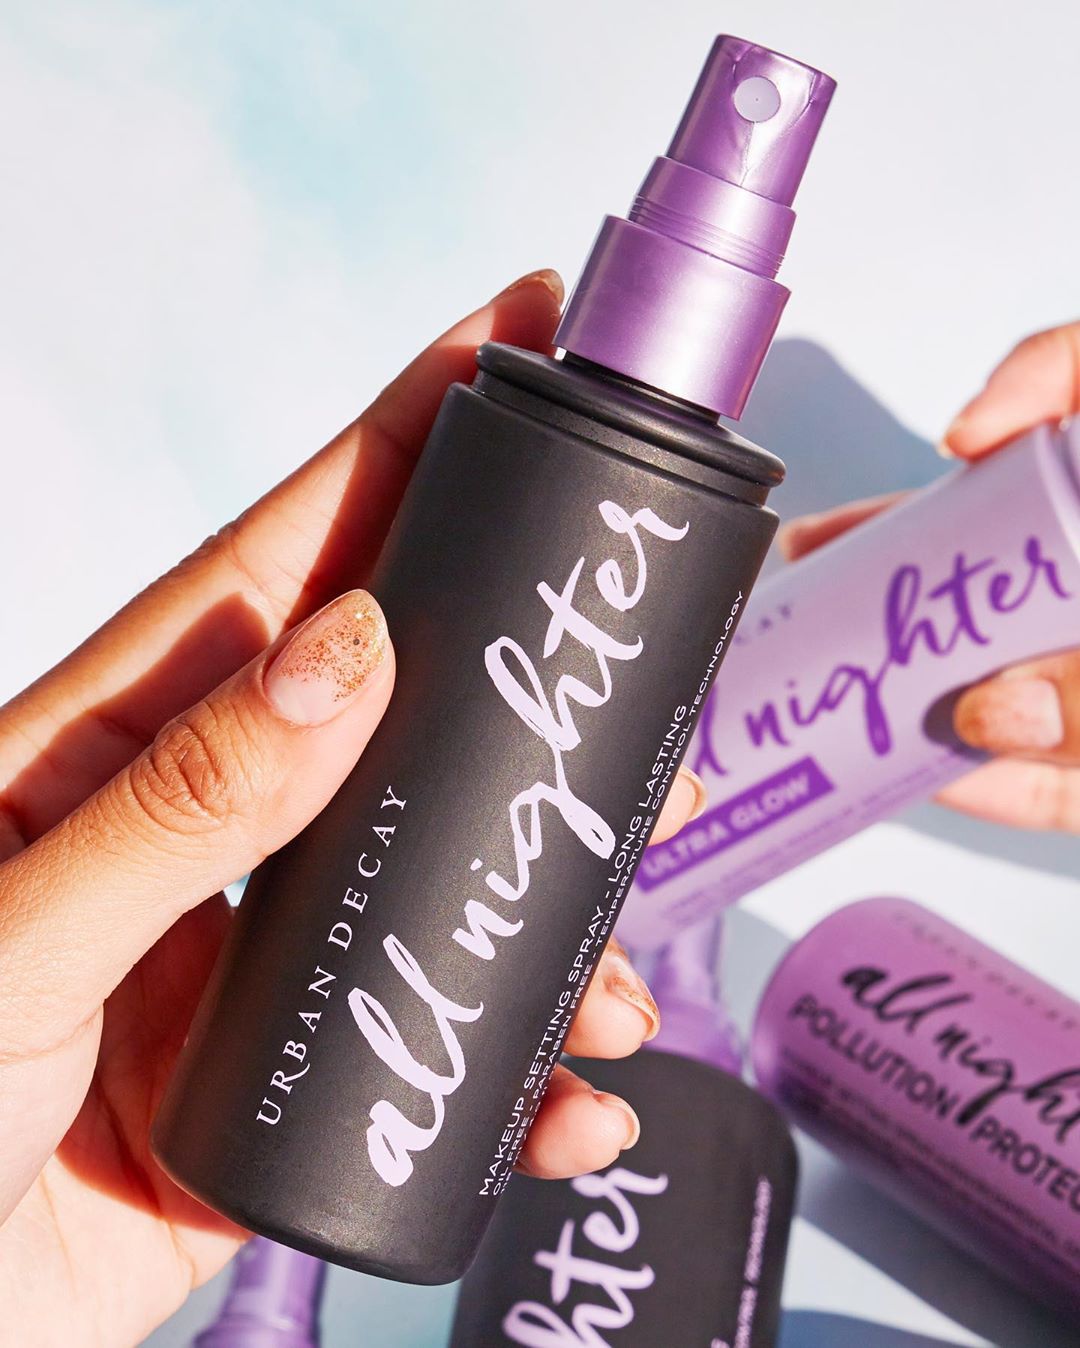 Urban Decay Cosmetics - Have you heard?! You can grab All Nighter Setting Spray for ONLY $19 at Ulta.com or in-store at @ULTABEAUTY! 💜 You def don't wanna miss this! #UrbanDecay #UDAllNighter #Ulta #U...